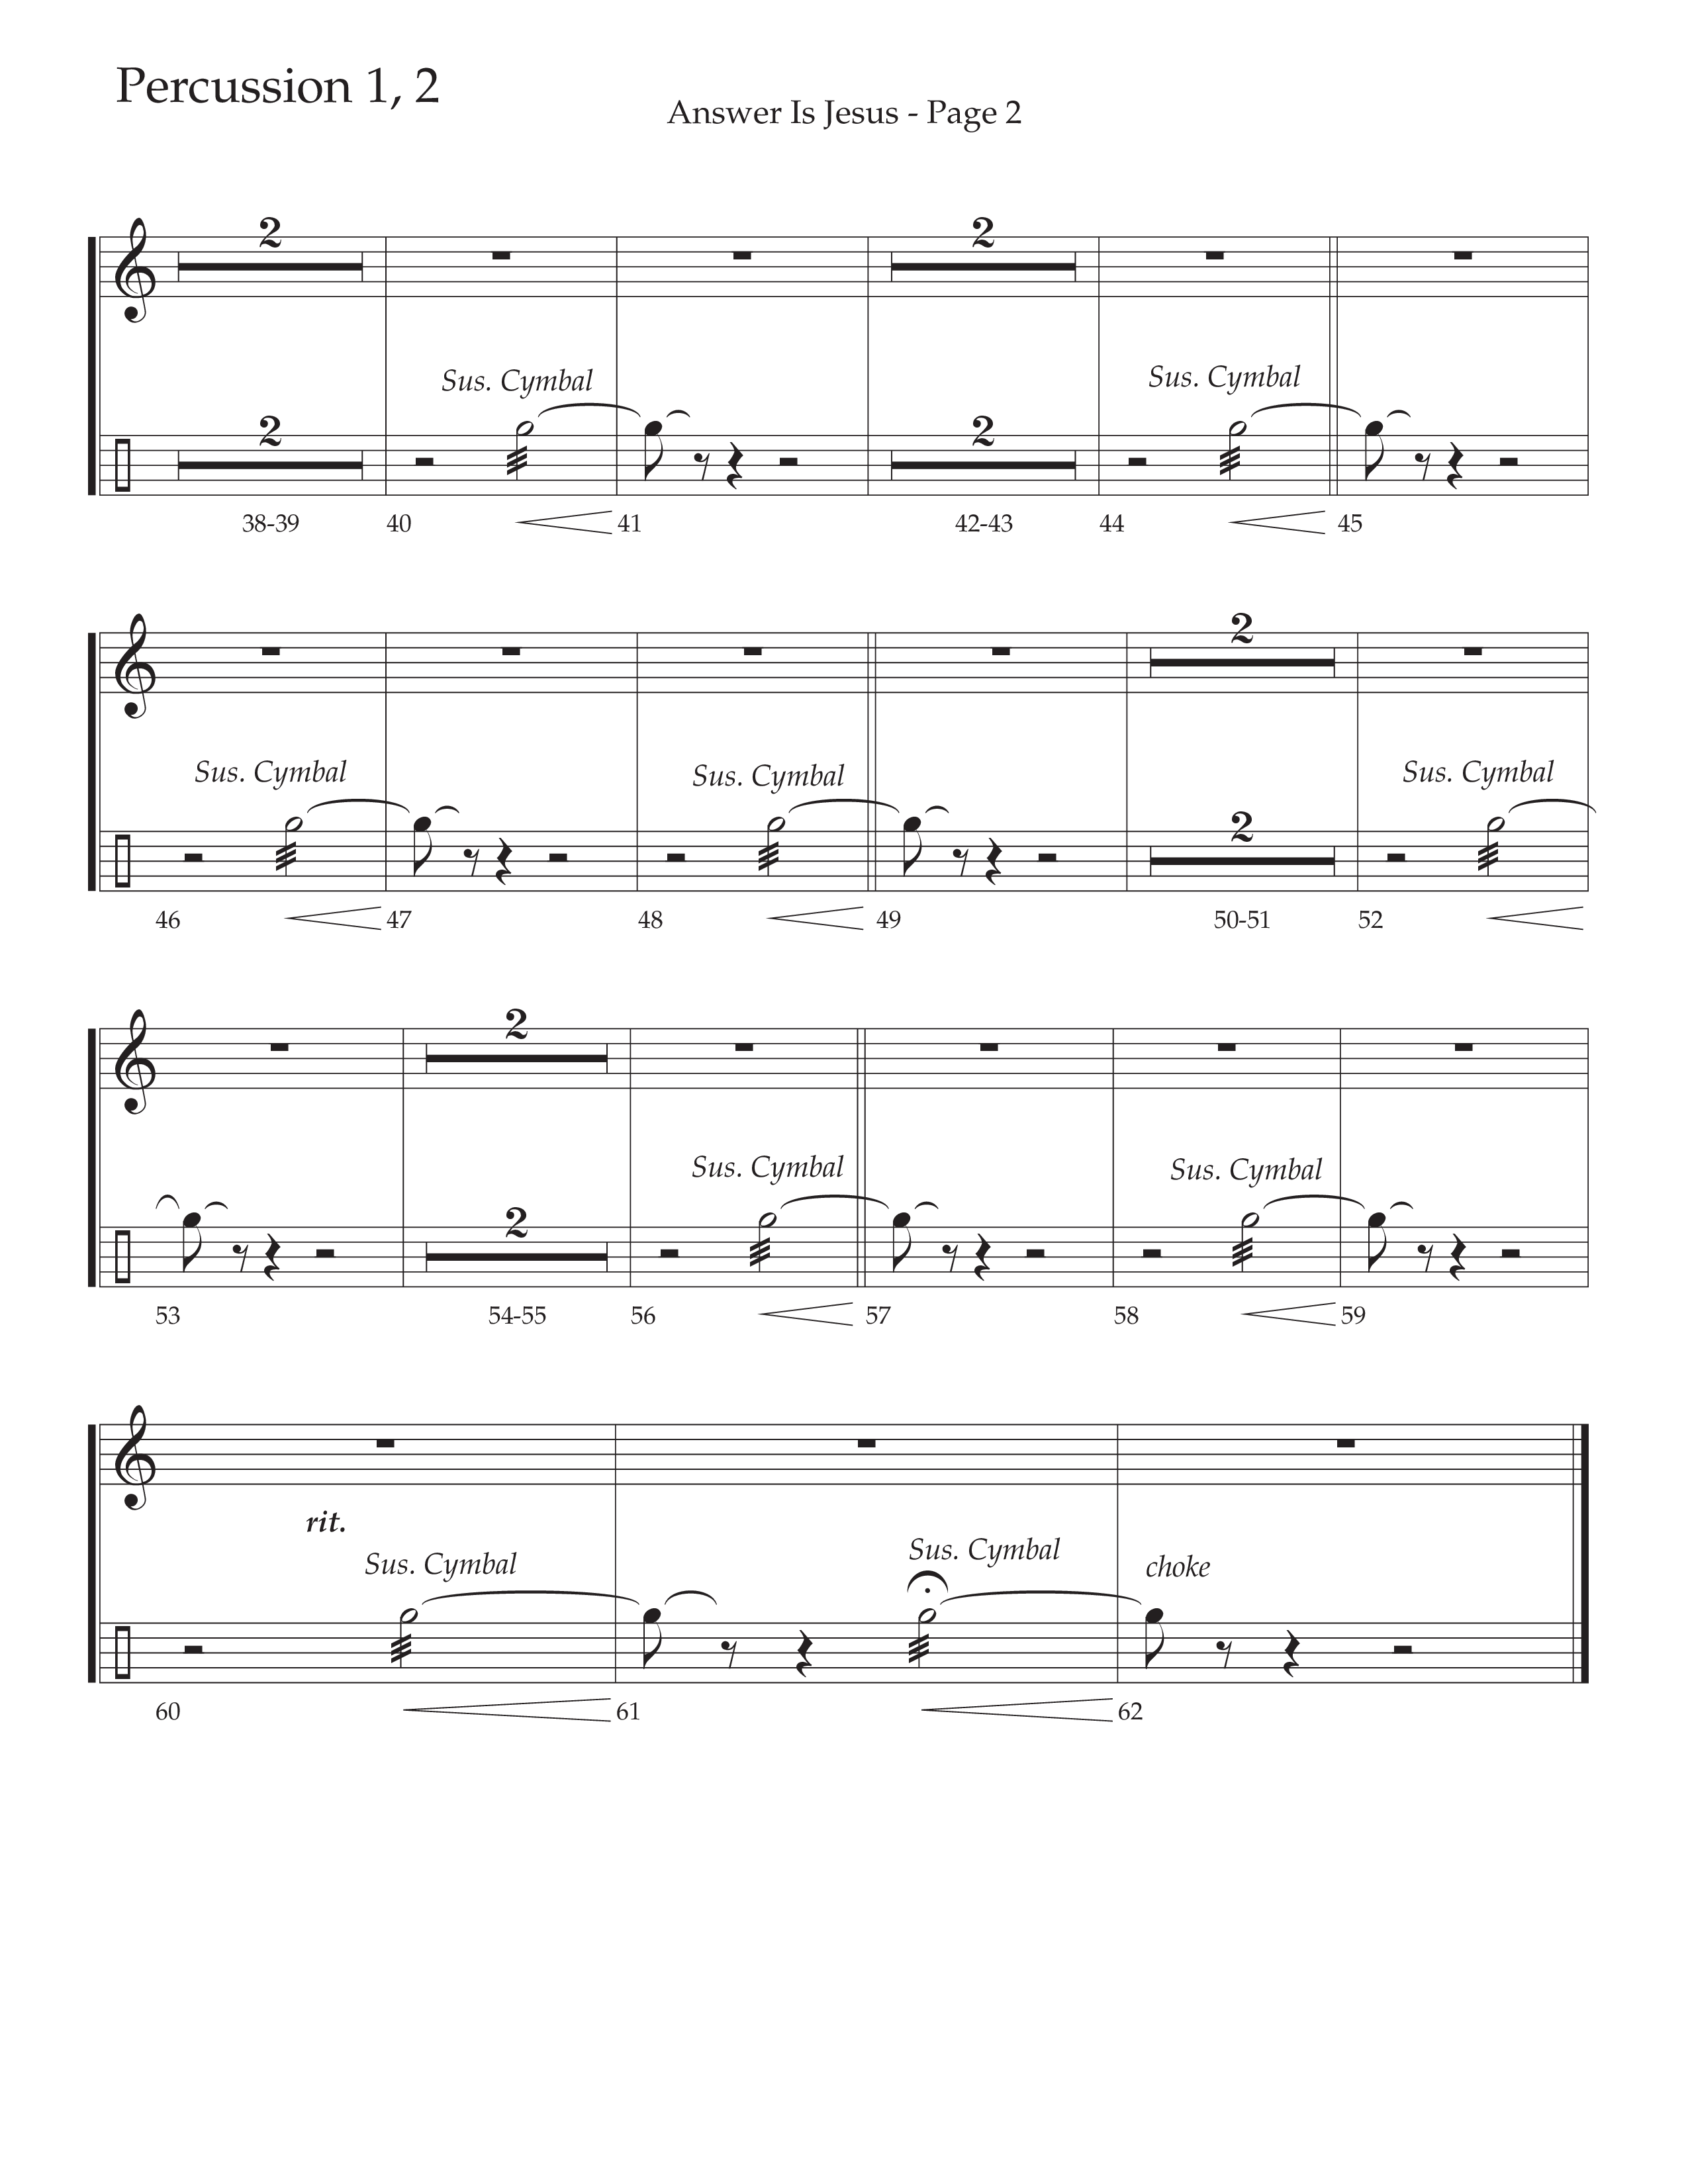 Answer Is Jesus (Choral Anthem SATB) Percussion 1/2 (Daywind Worship / Arr. Marty Hamby)